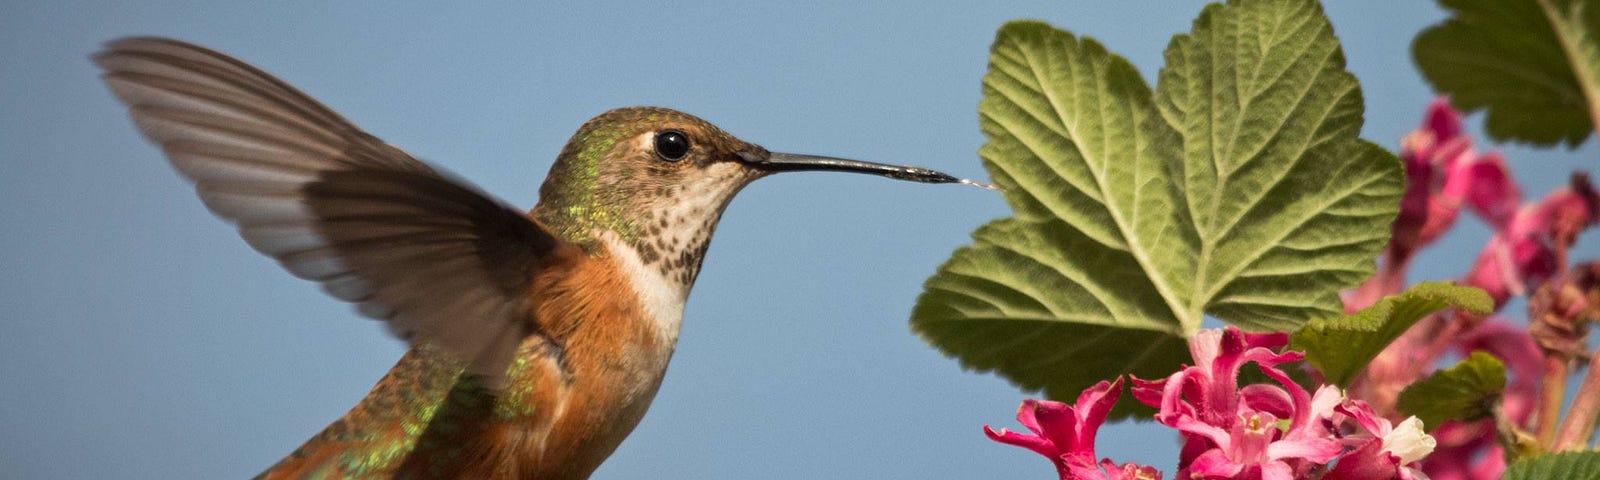 A female rufous hummingbird approaches a currant flower to feed